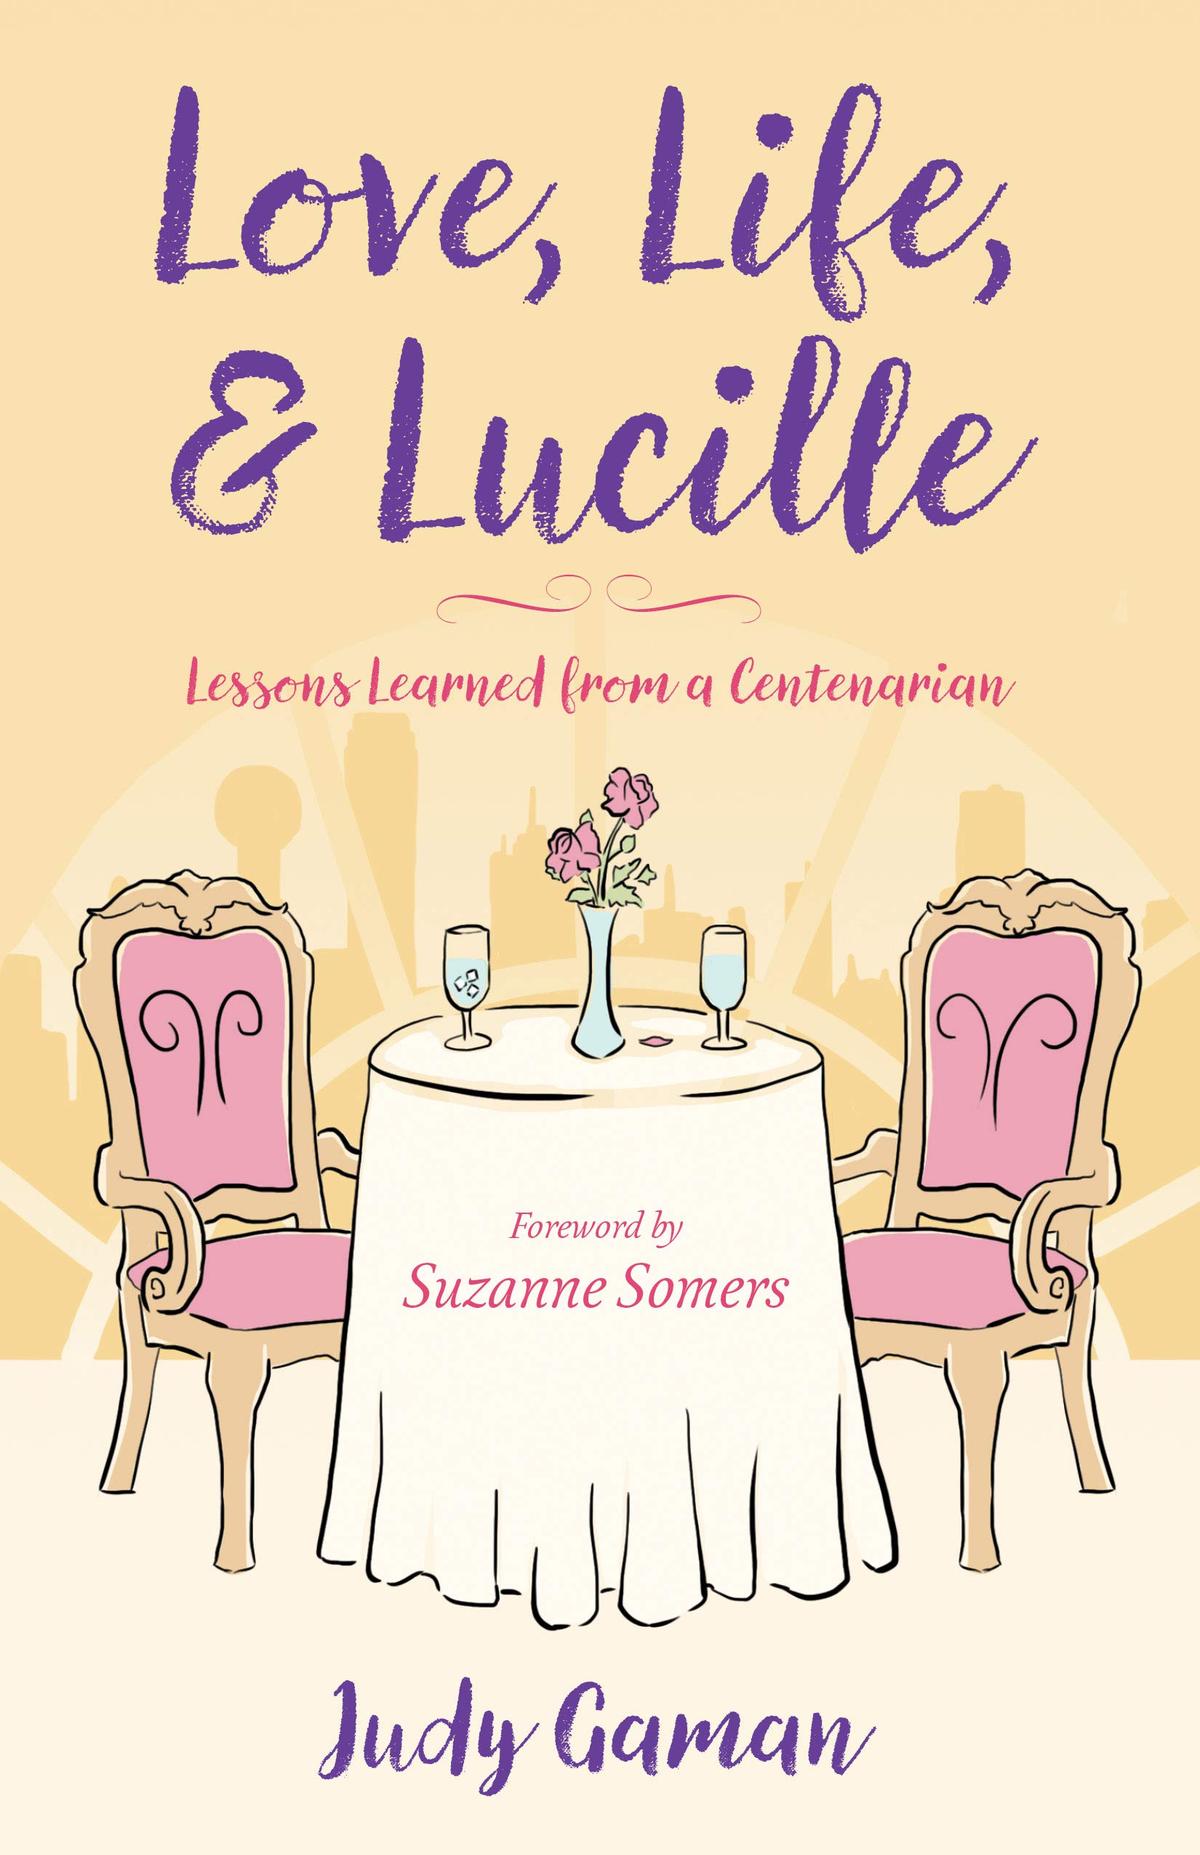 The cover of Judy Gaman's book "Love, Life, & Lucille: Lessons Learned from a Centenarian." (Courtesy of Judy Gaman)